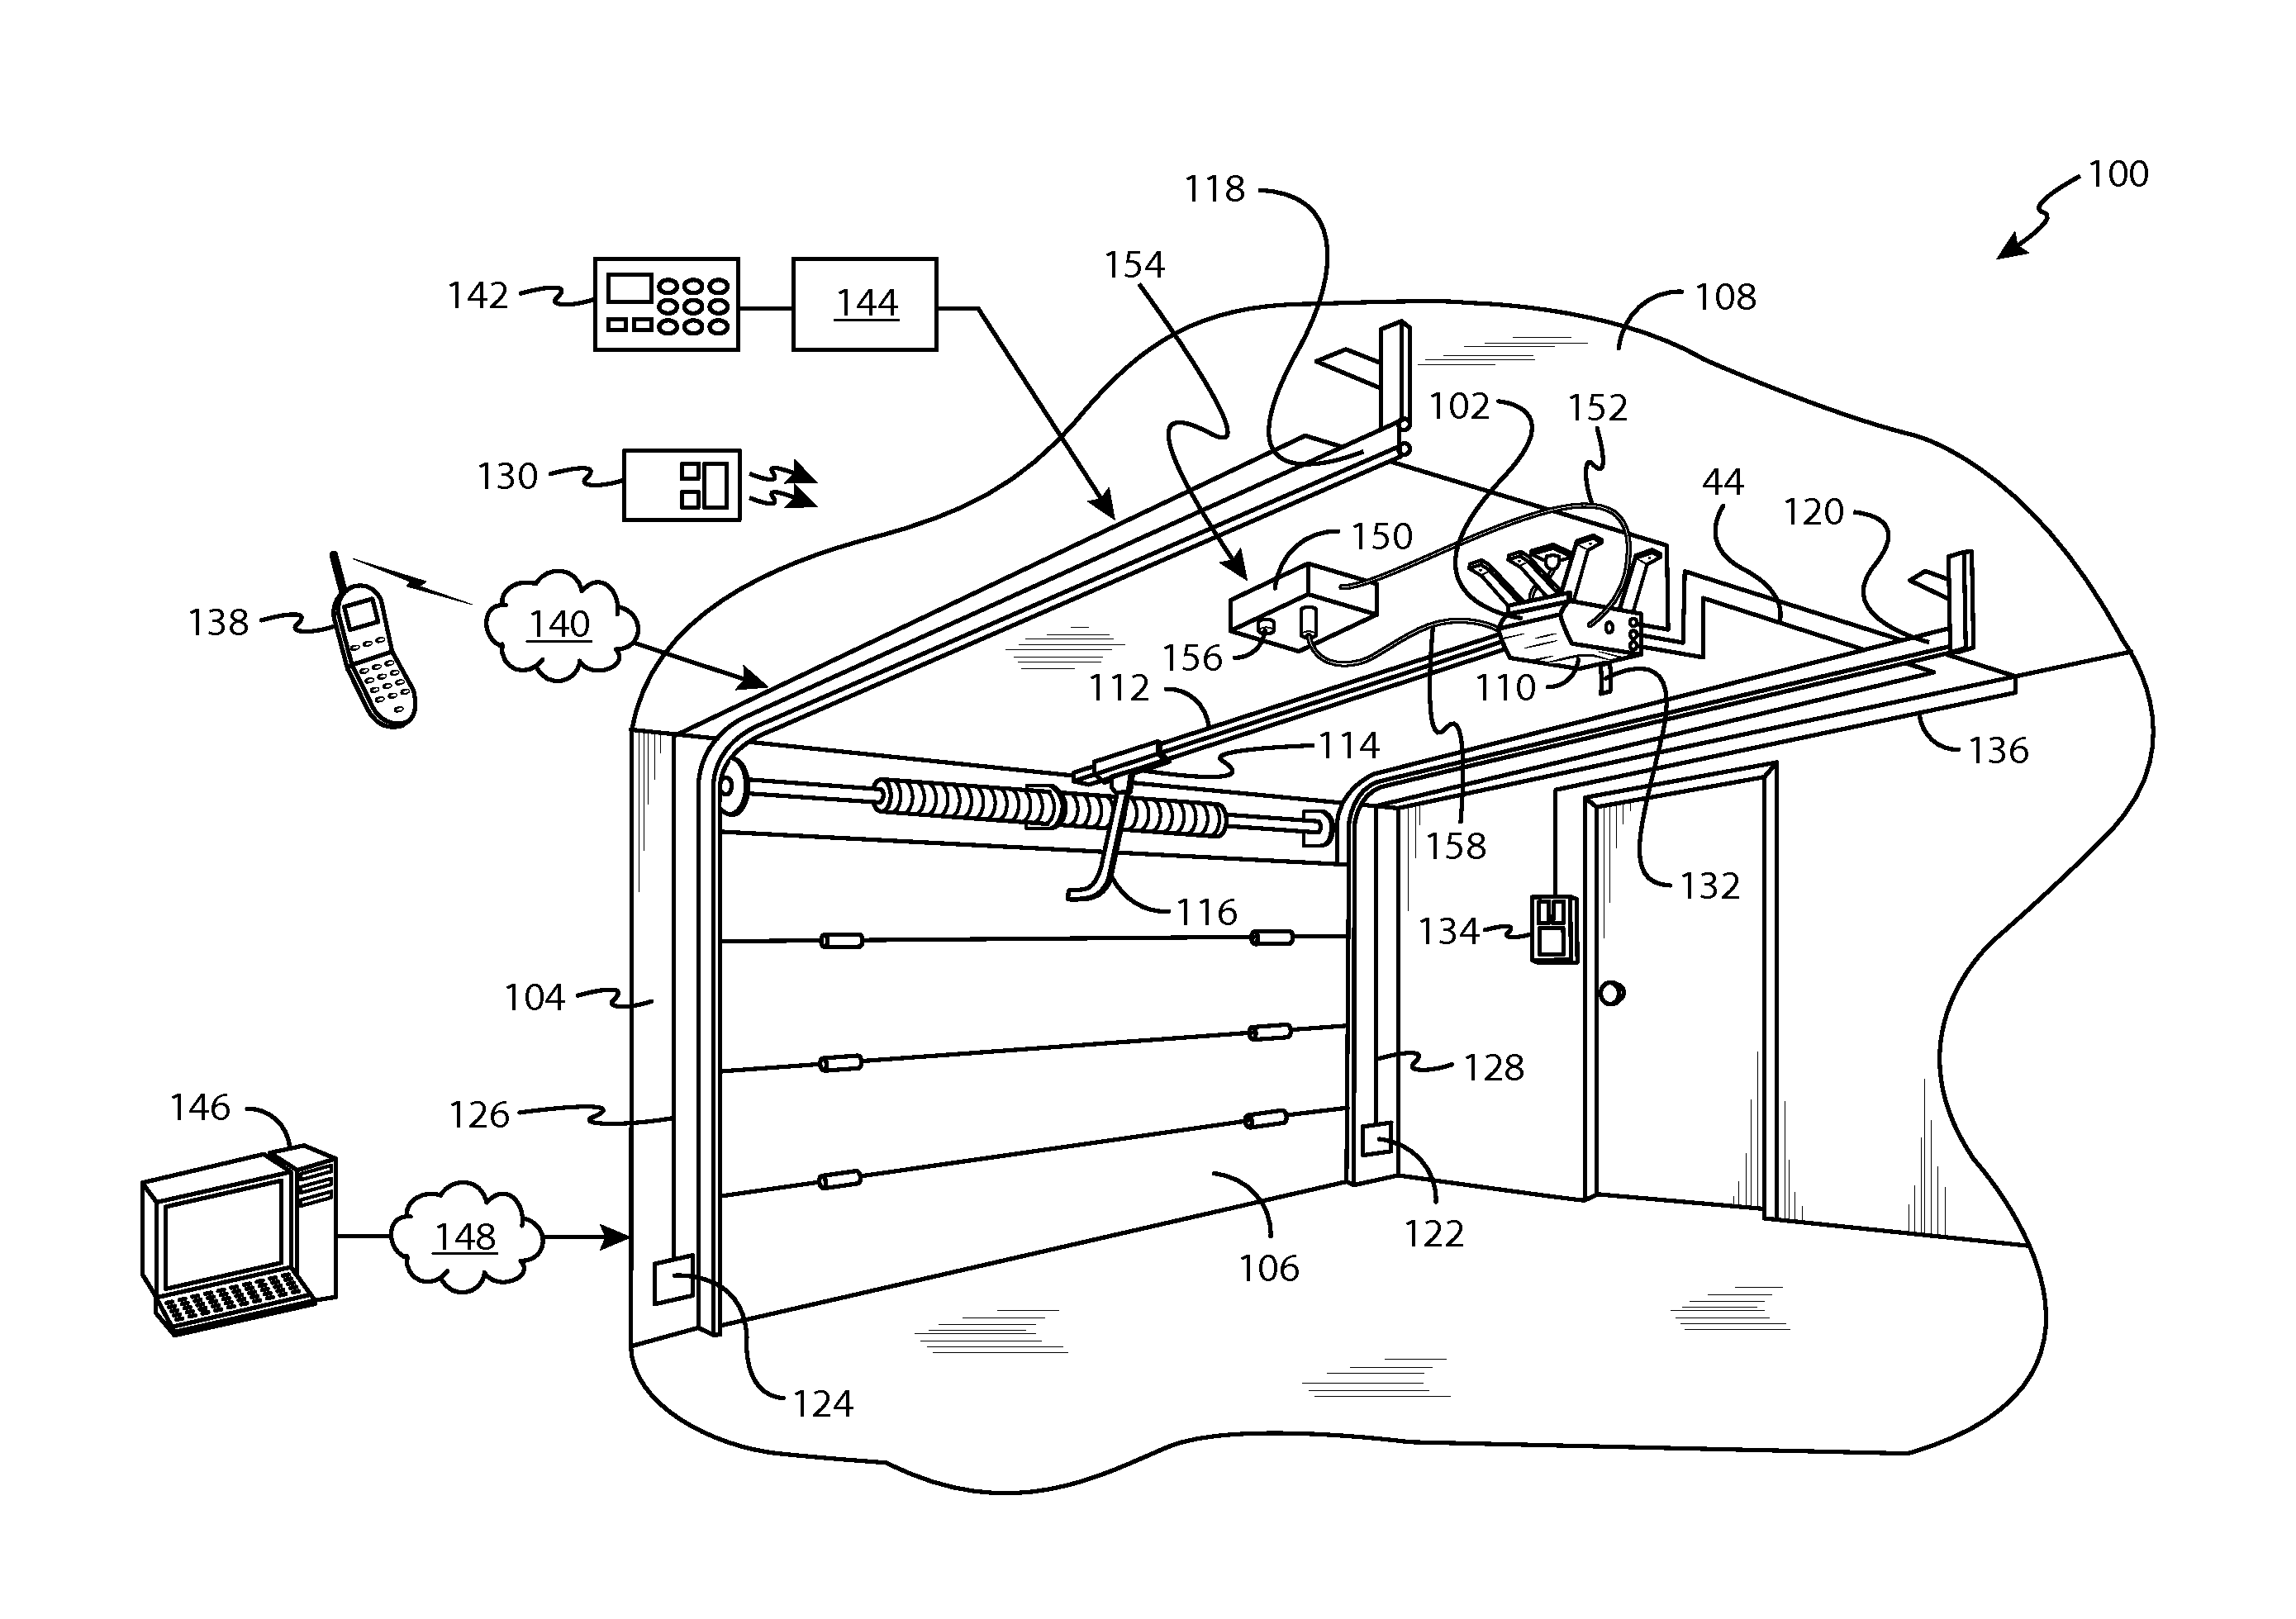 Method and apparatus for controlling a movable barrier system